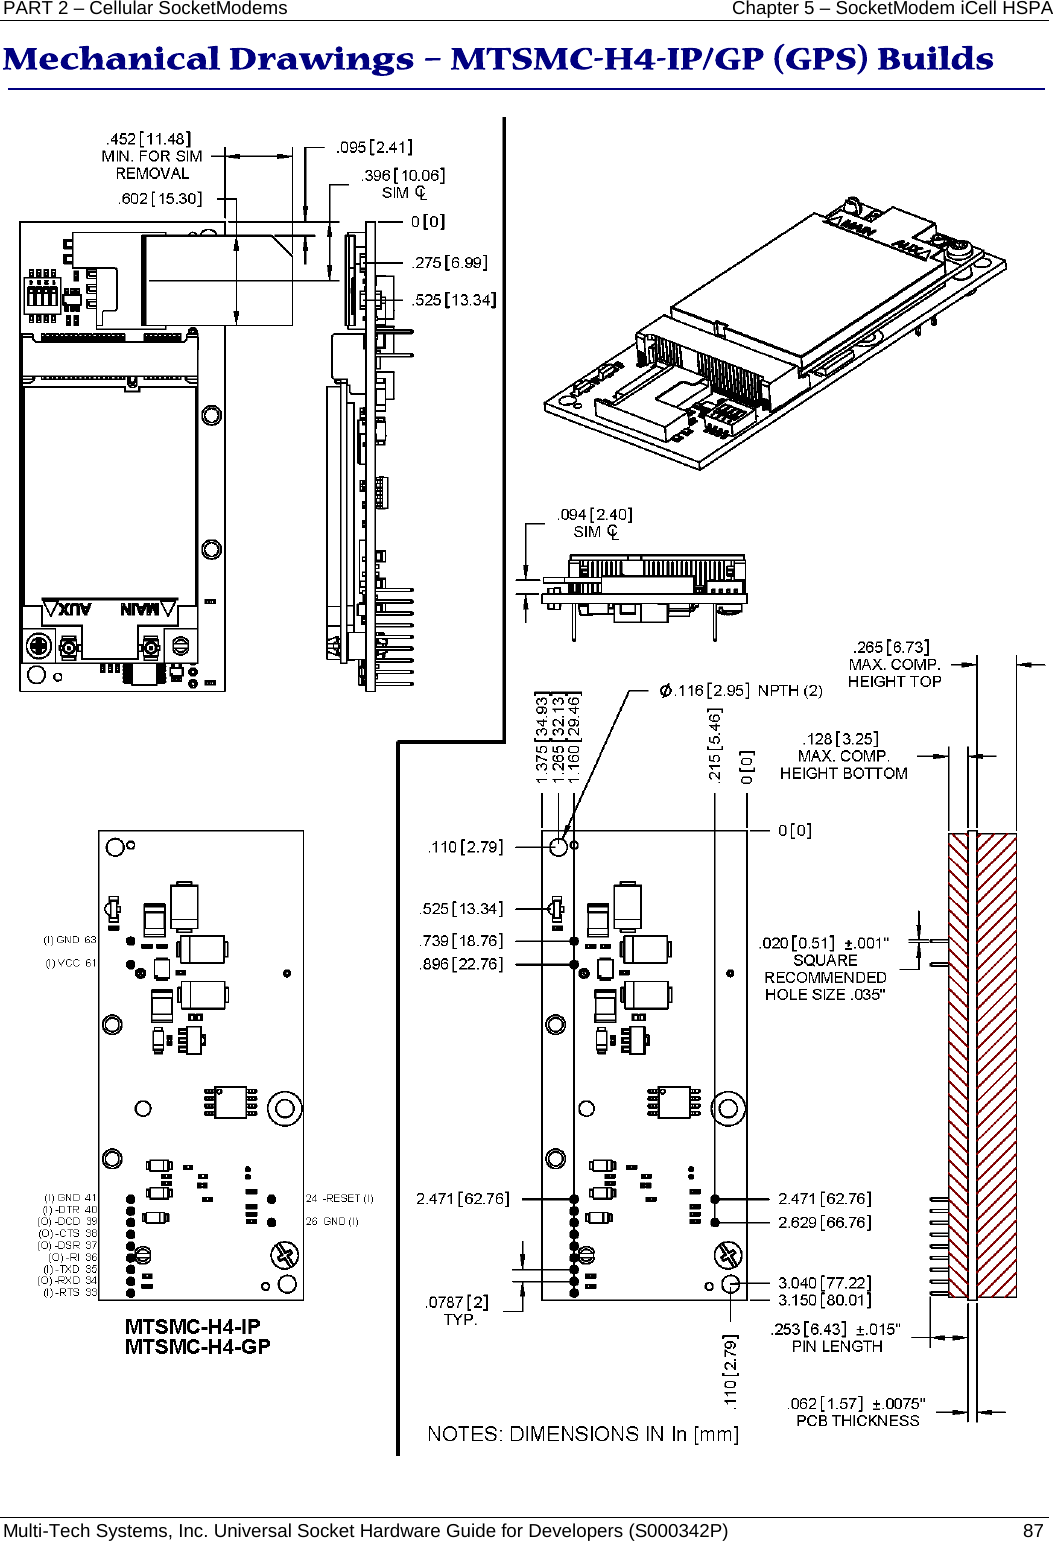 PART 2 – Cellular SocketModems Chapter 5 – SocketModem iCell HSPA Multi-Tech Systems, Inc. Universal Socket Hardware Guide for Developers (S000342P)  87  Mechanical Drawings – MTSMC-H4-IP/GP (GPS) Builds    